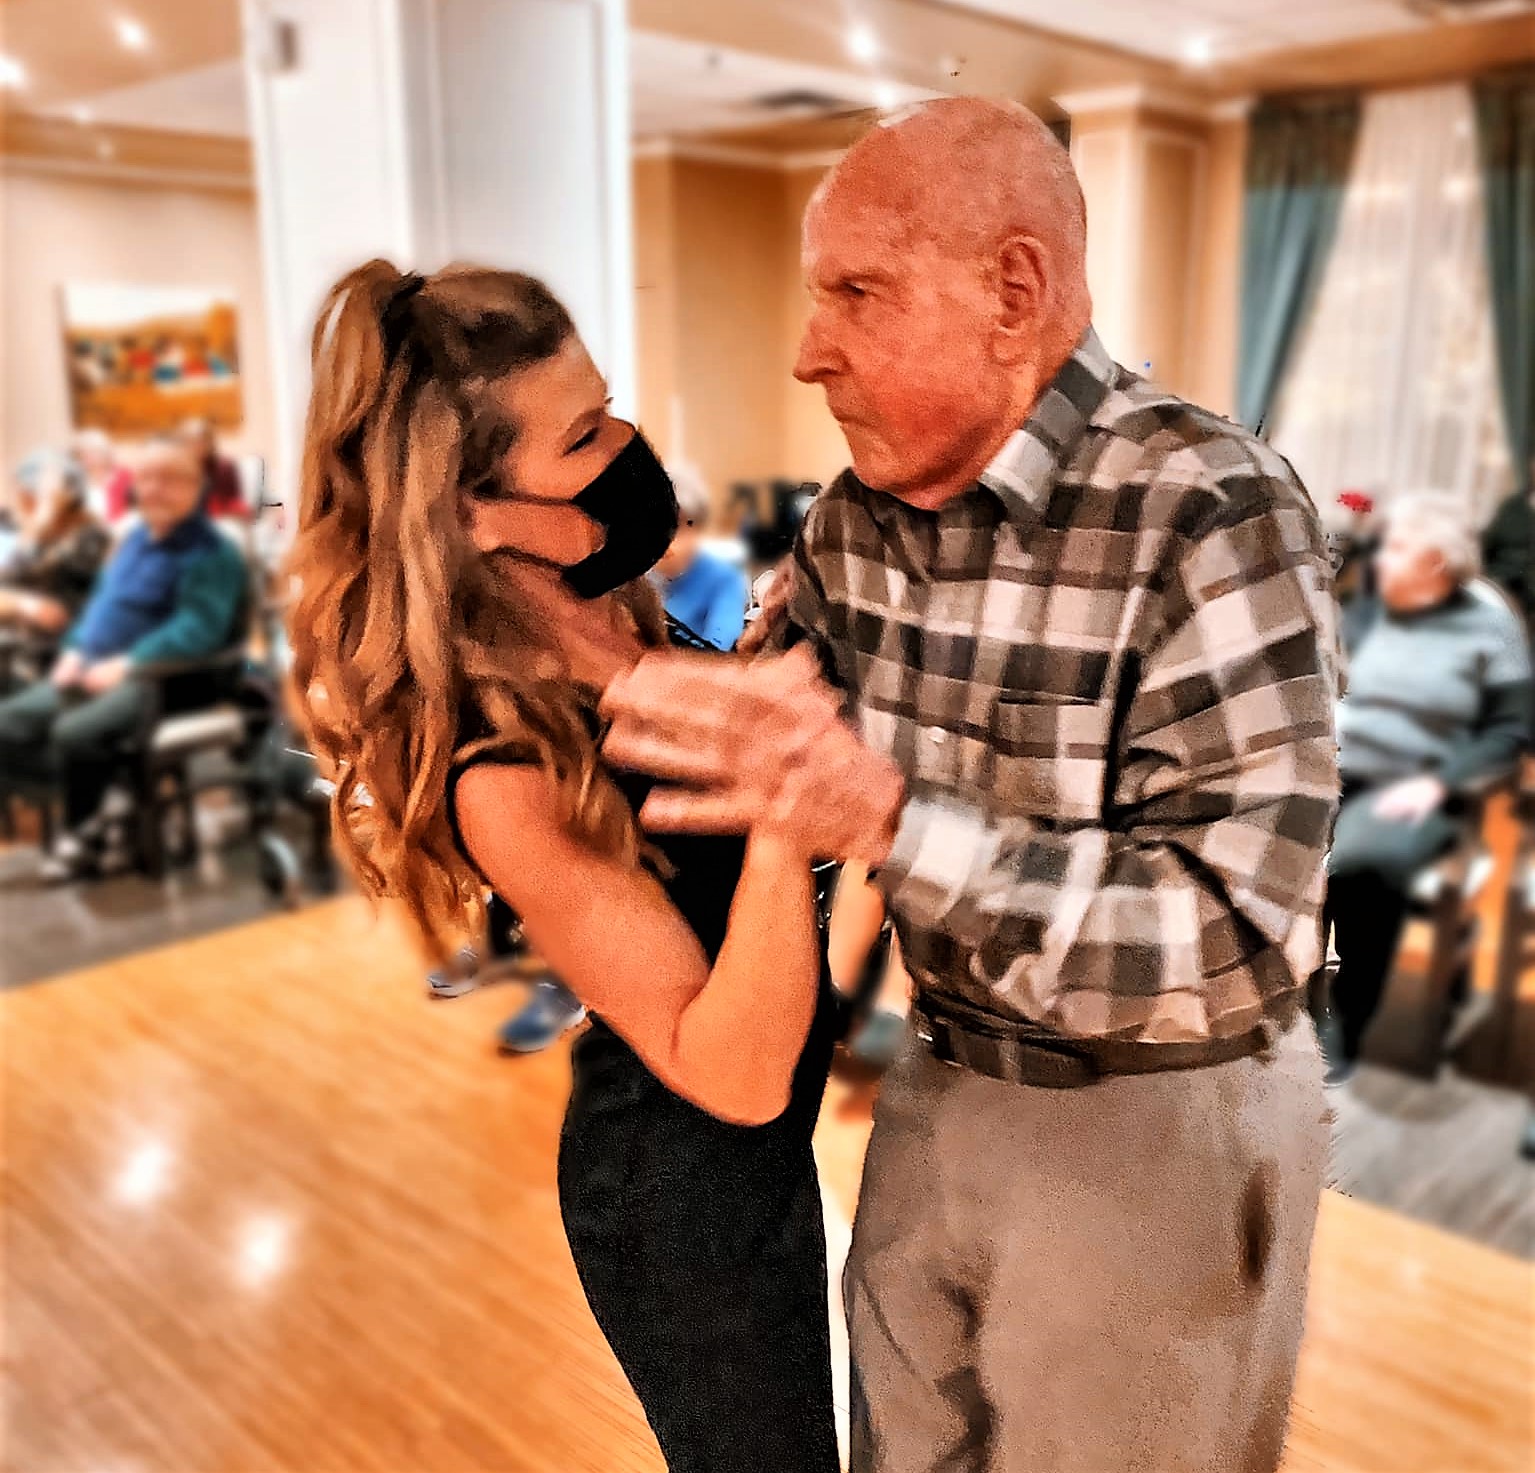 Young woman in little black dress dancing with senior man.